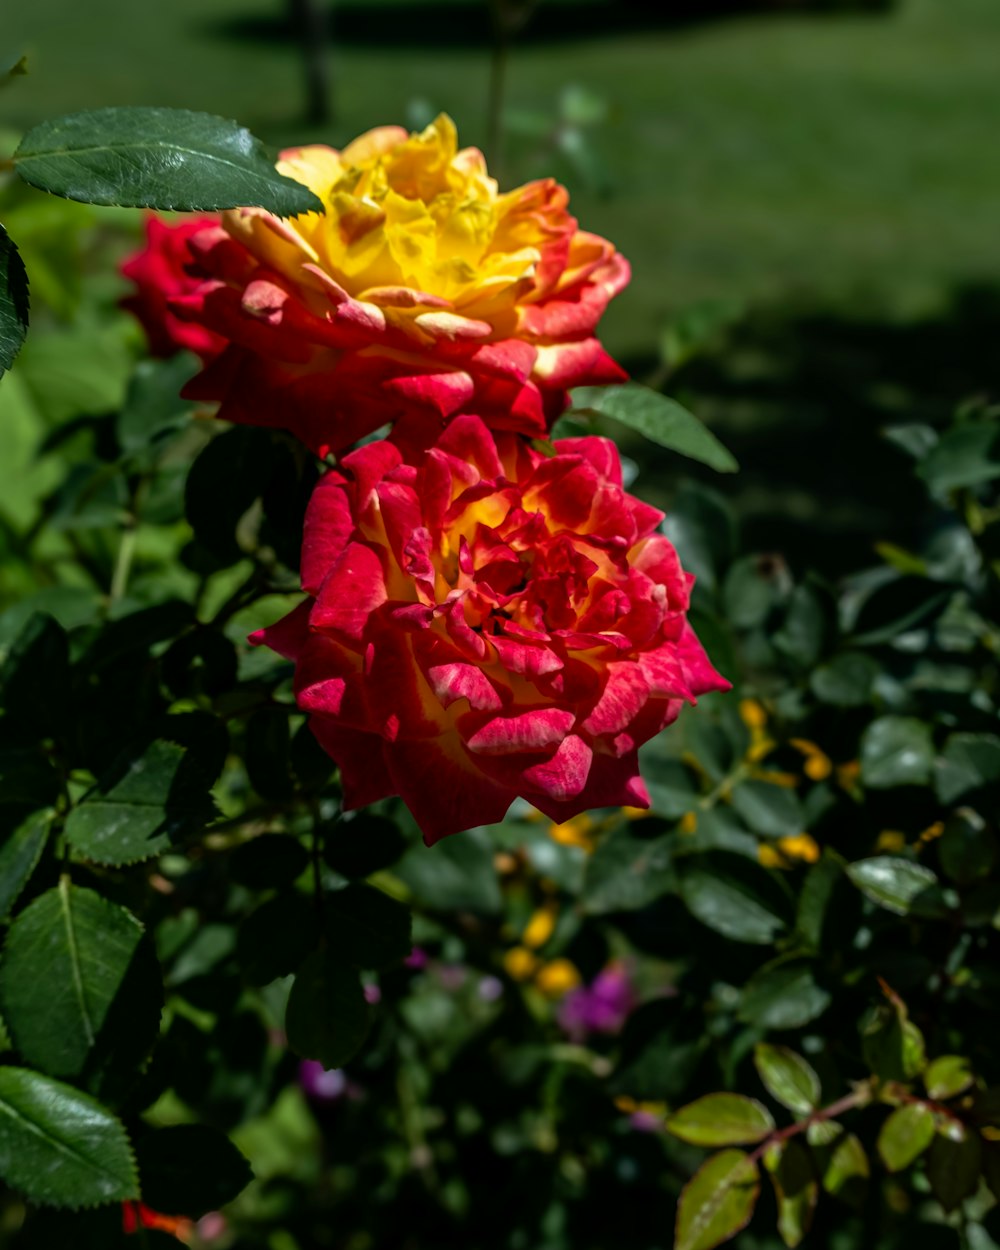 a red and yellow rose in a garden